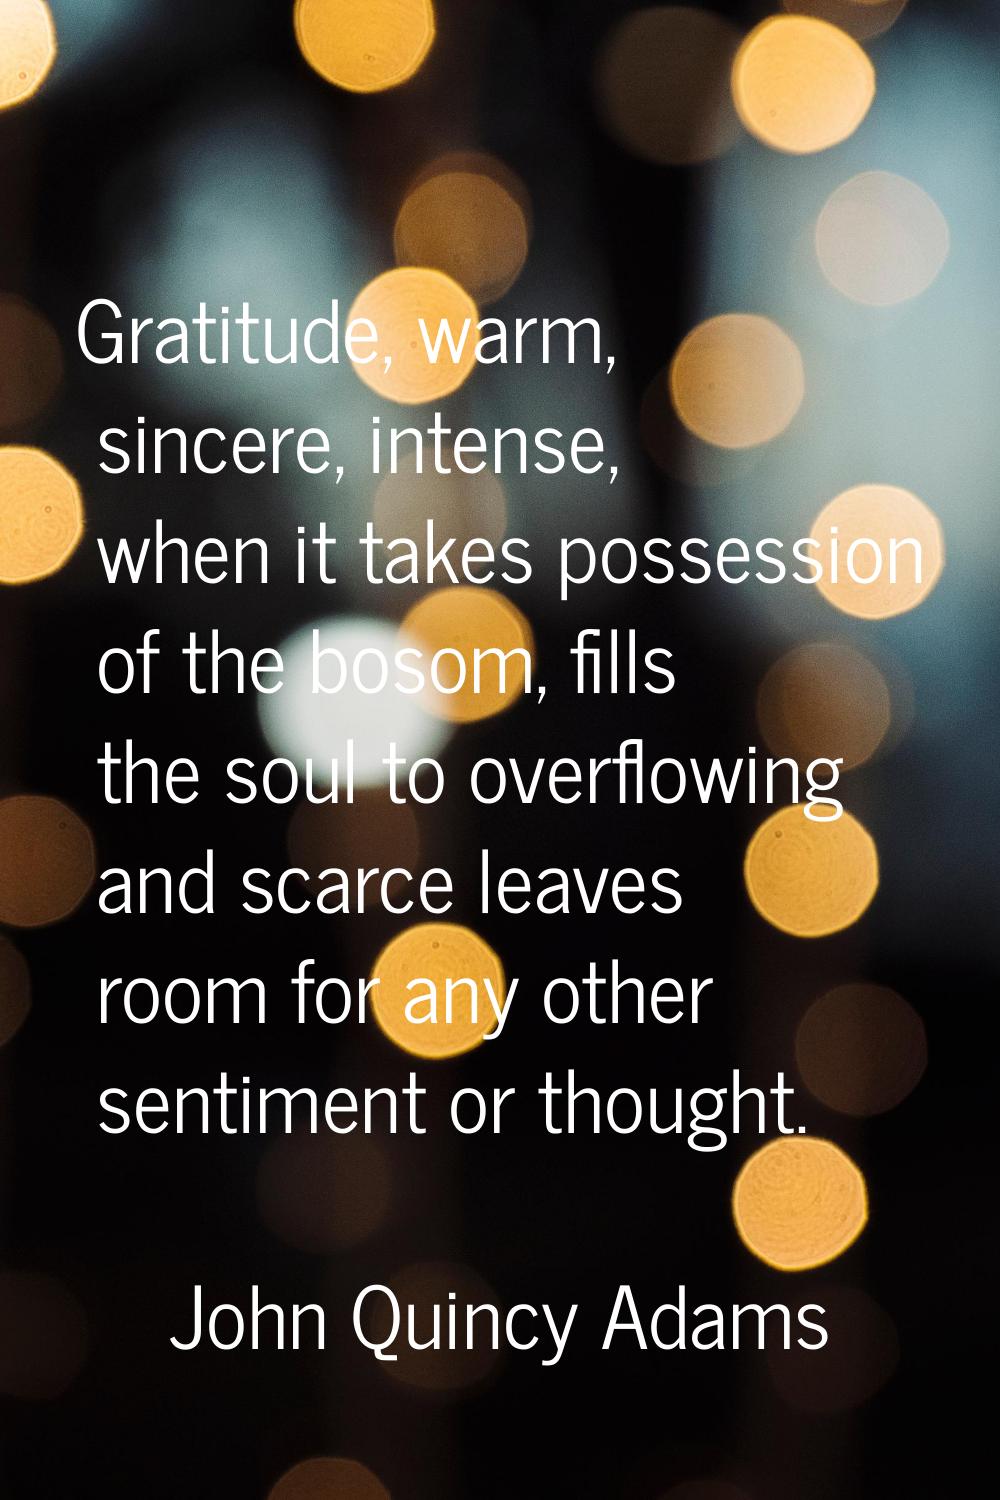 Gratitude, warm, sincere, intense, when it takes possession of the bosom, fills the soul to overflo